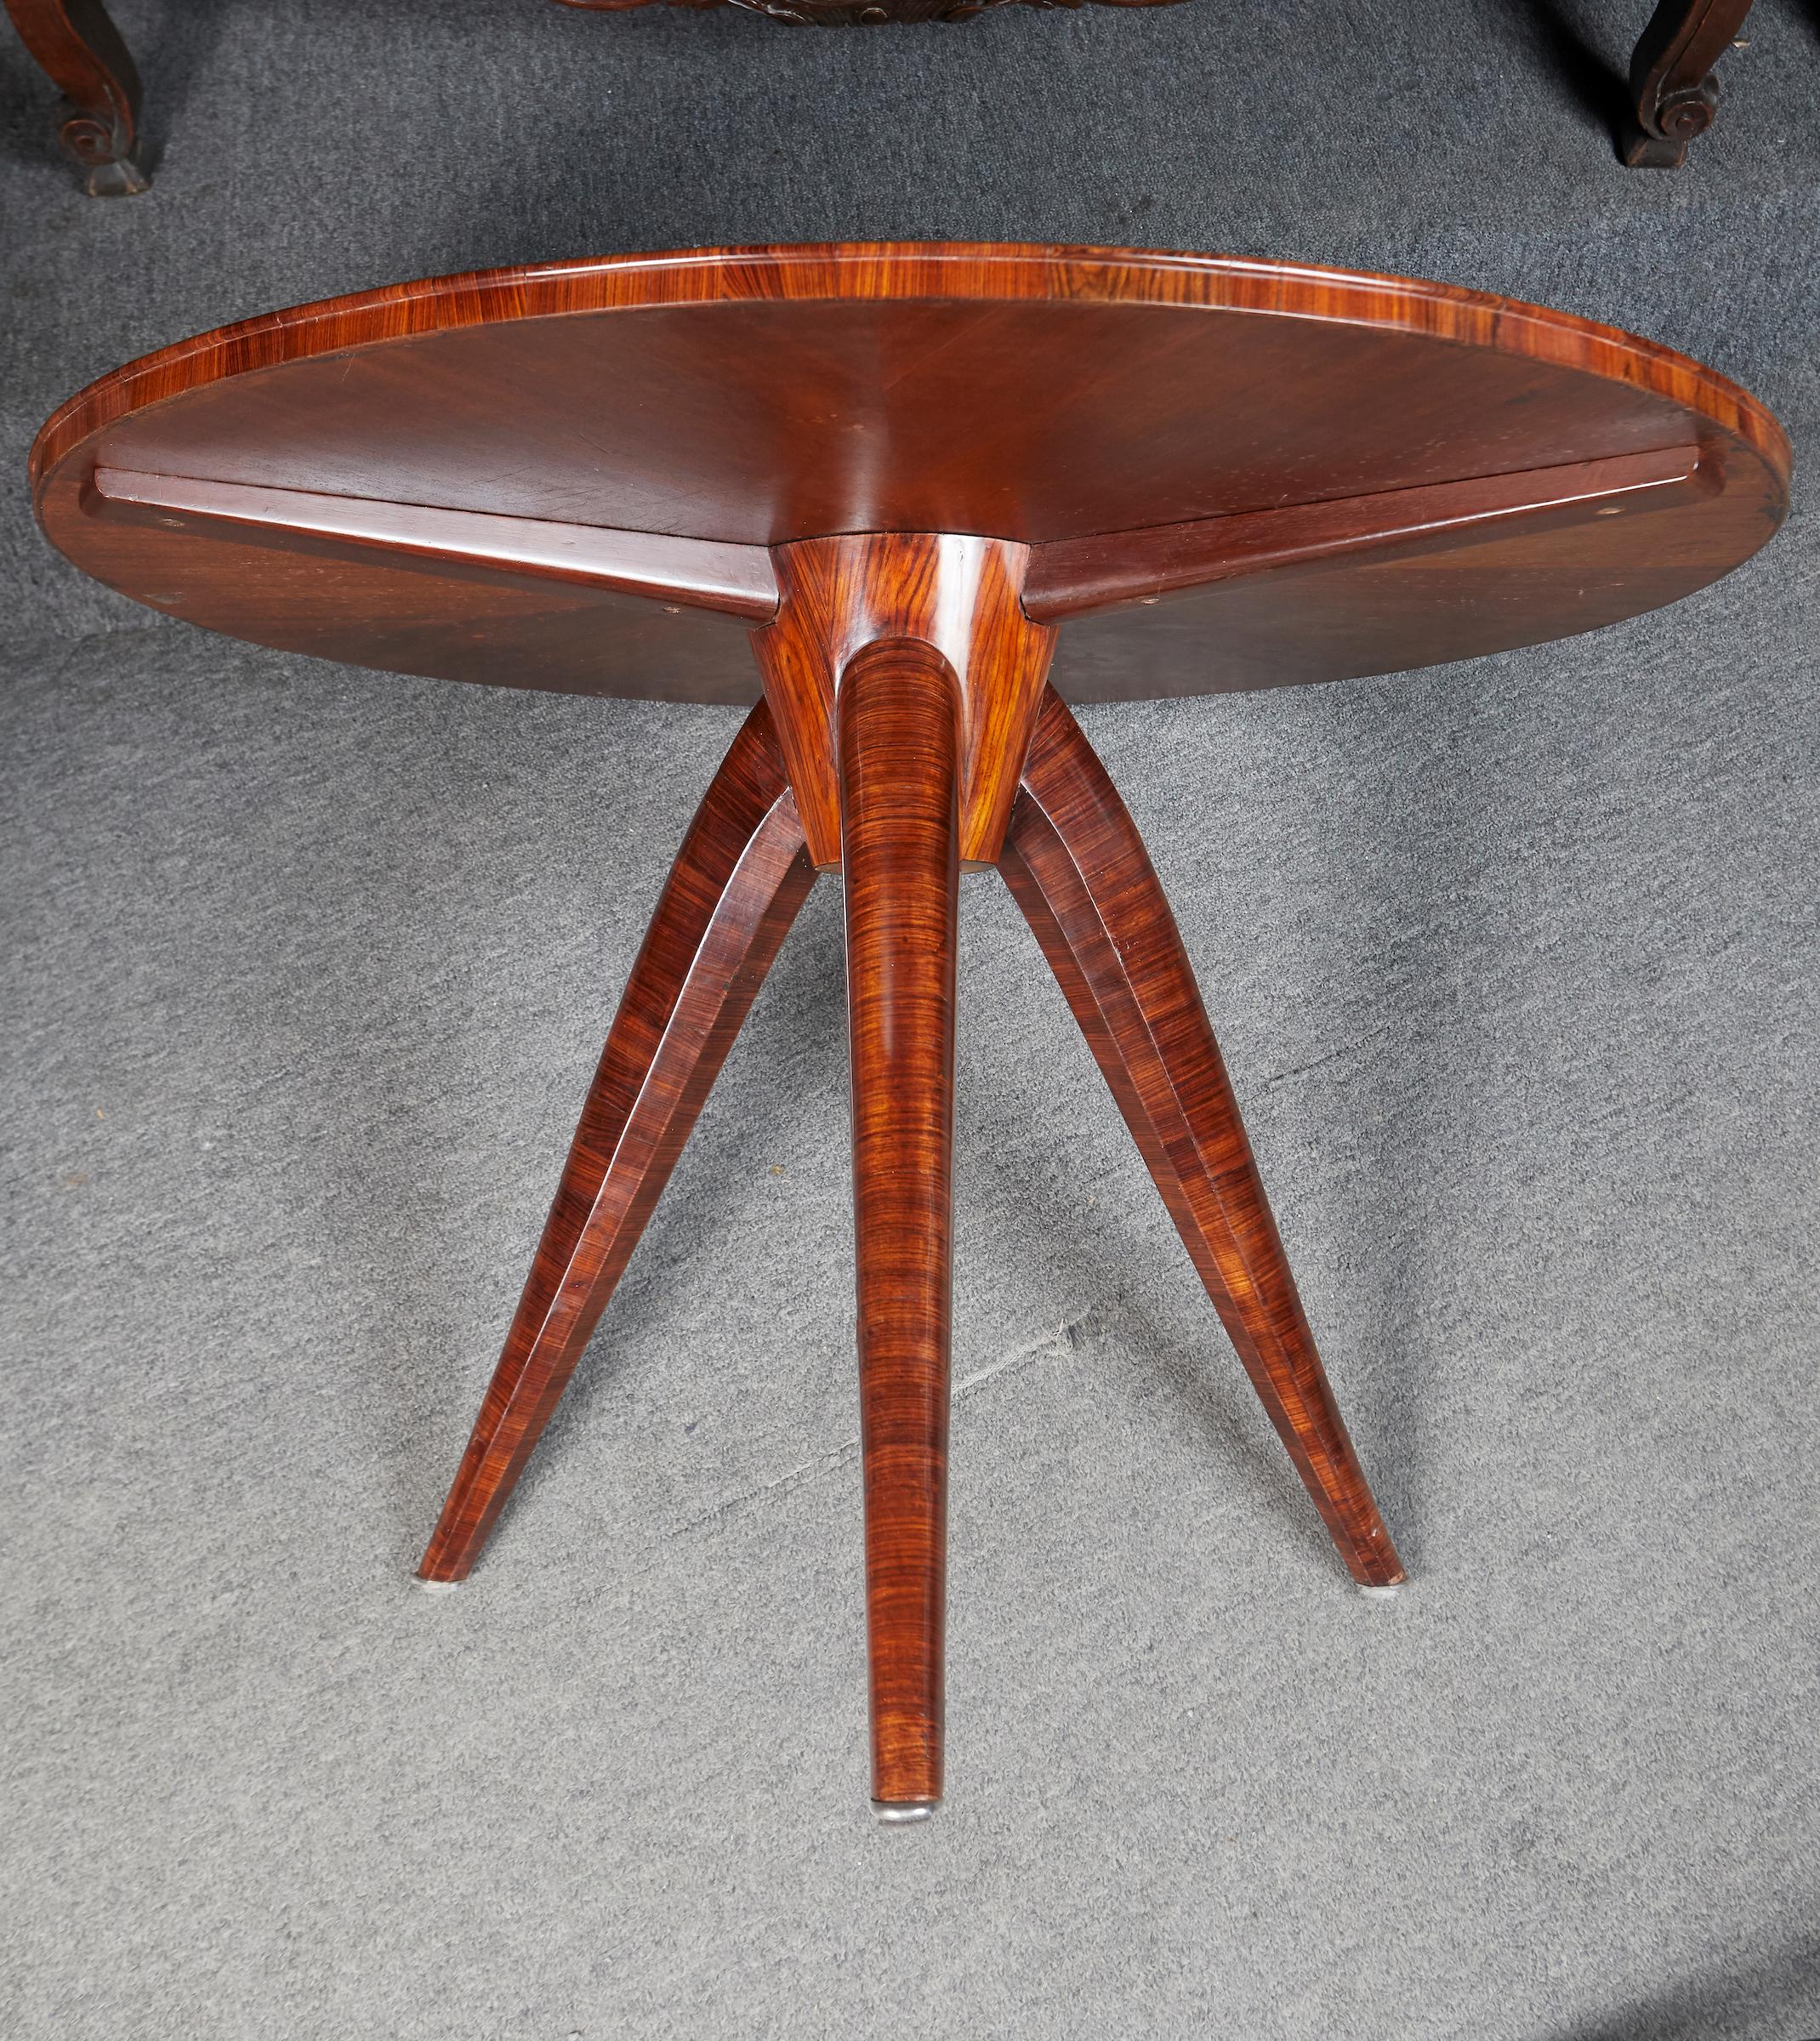 Stunning Art Deco Marquetry Side Table by Etienne Kohlmann For Sale 2